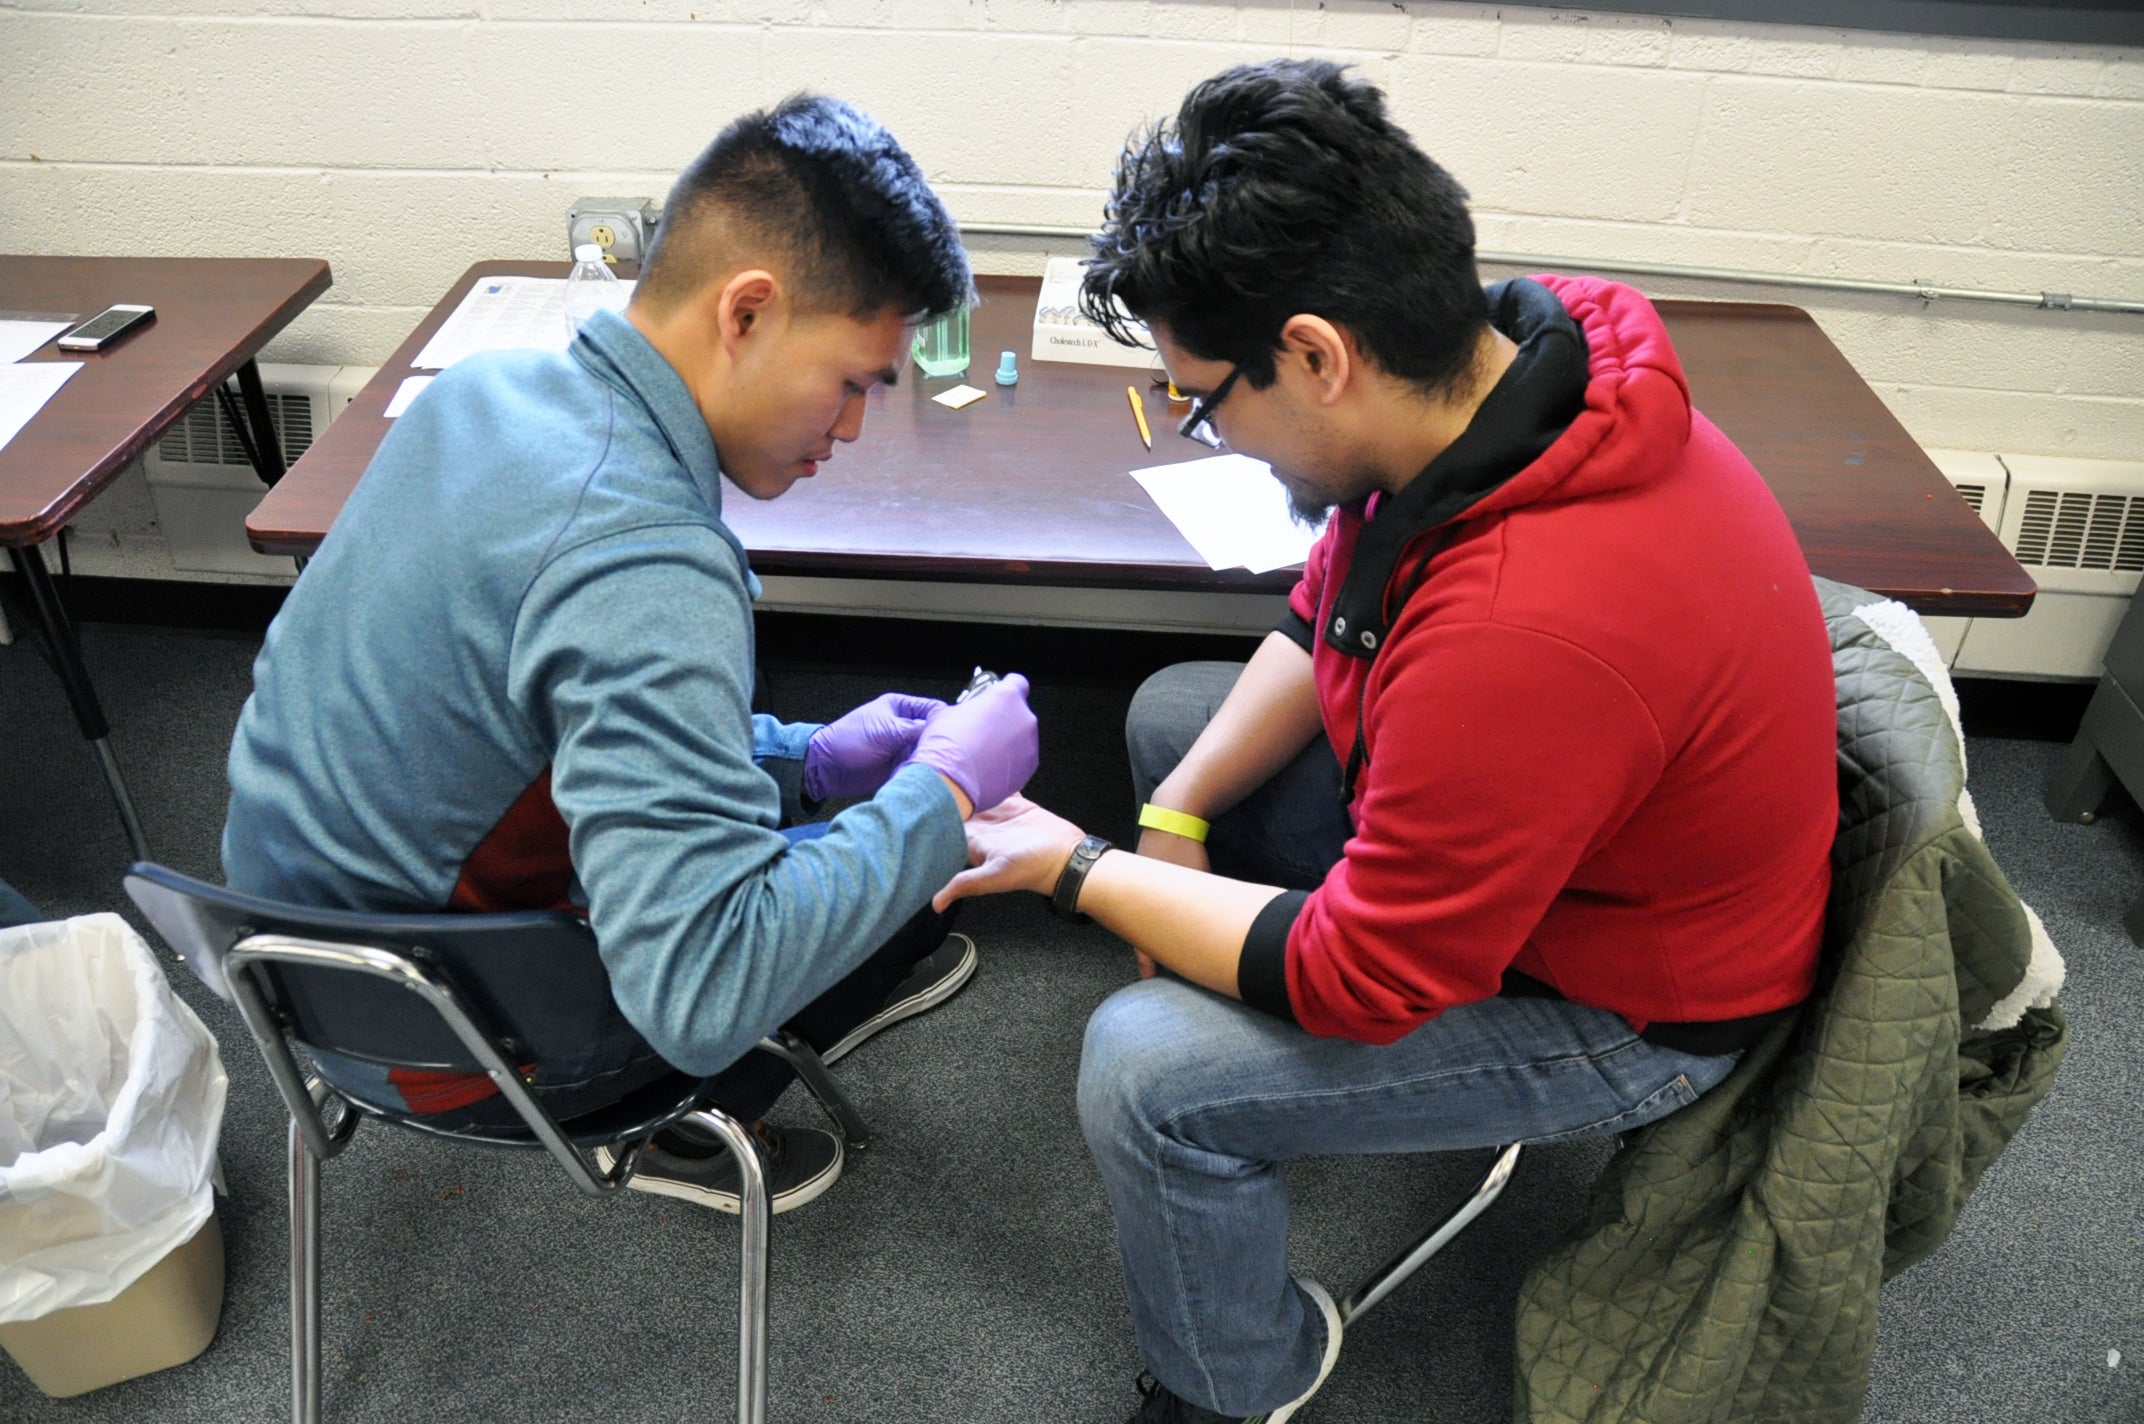 First year UUT M.D. student Minh Do, left, performs a glucose test on a patient at the health fair.